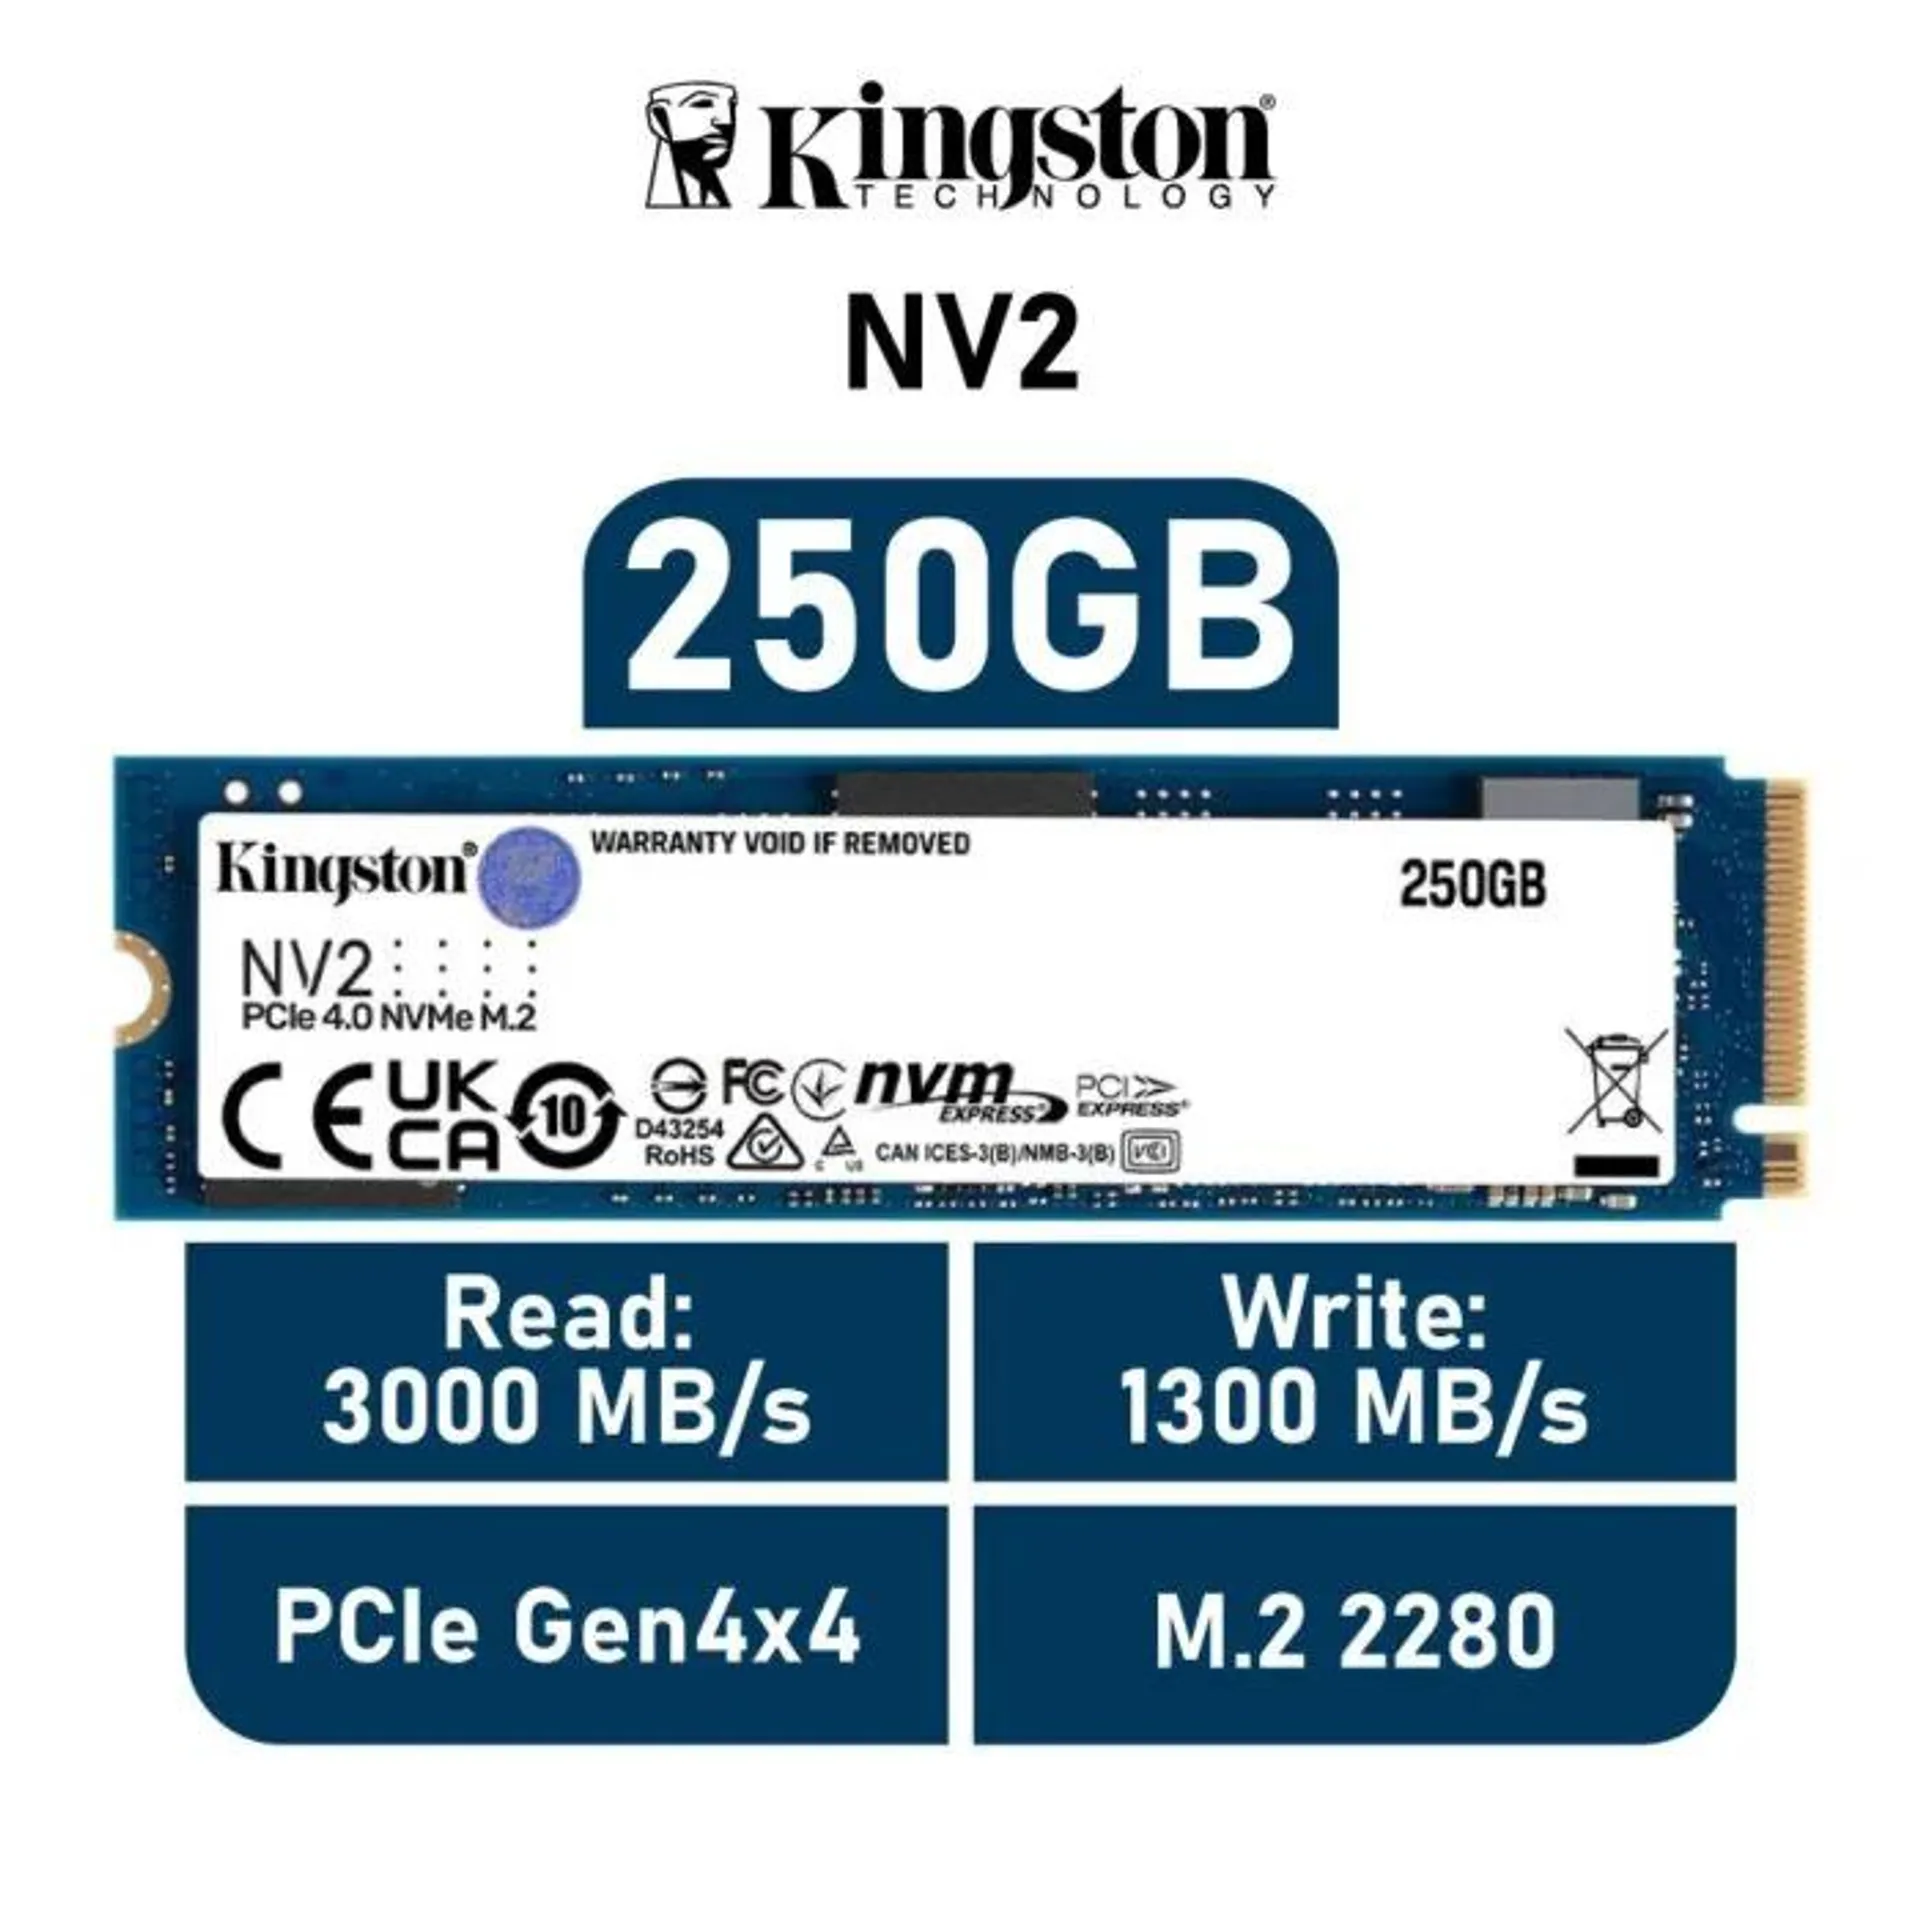 Kingston NV2 250GB PCIe Gen4x4 SNV2S/250G M.2 2280 Solid State Drive